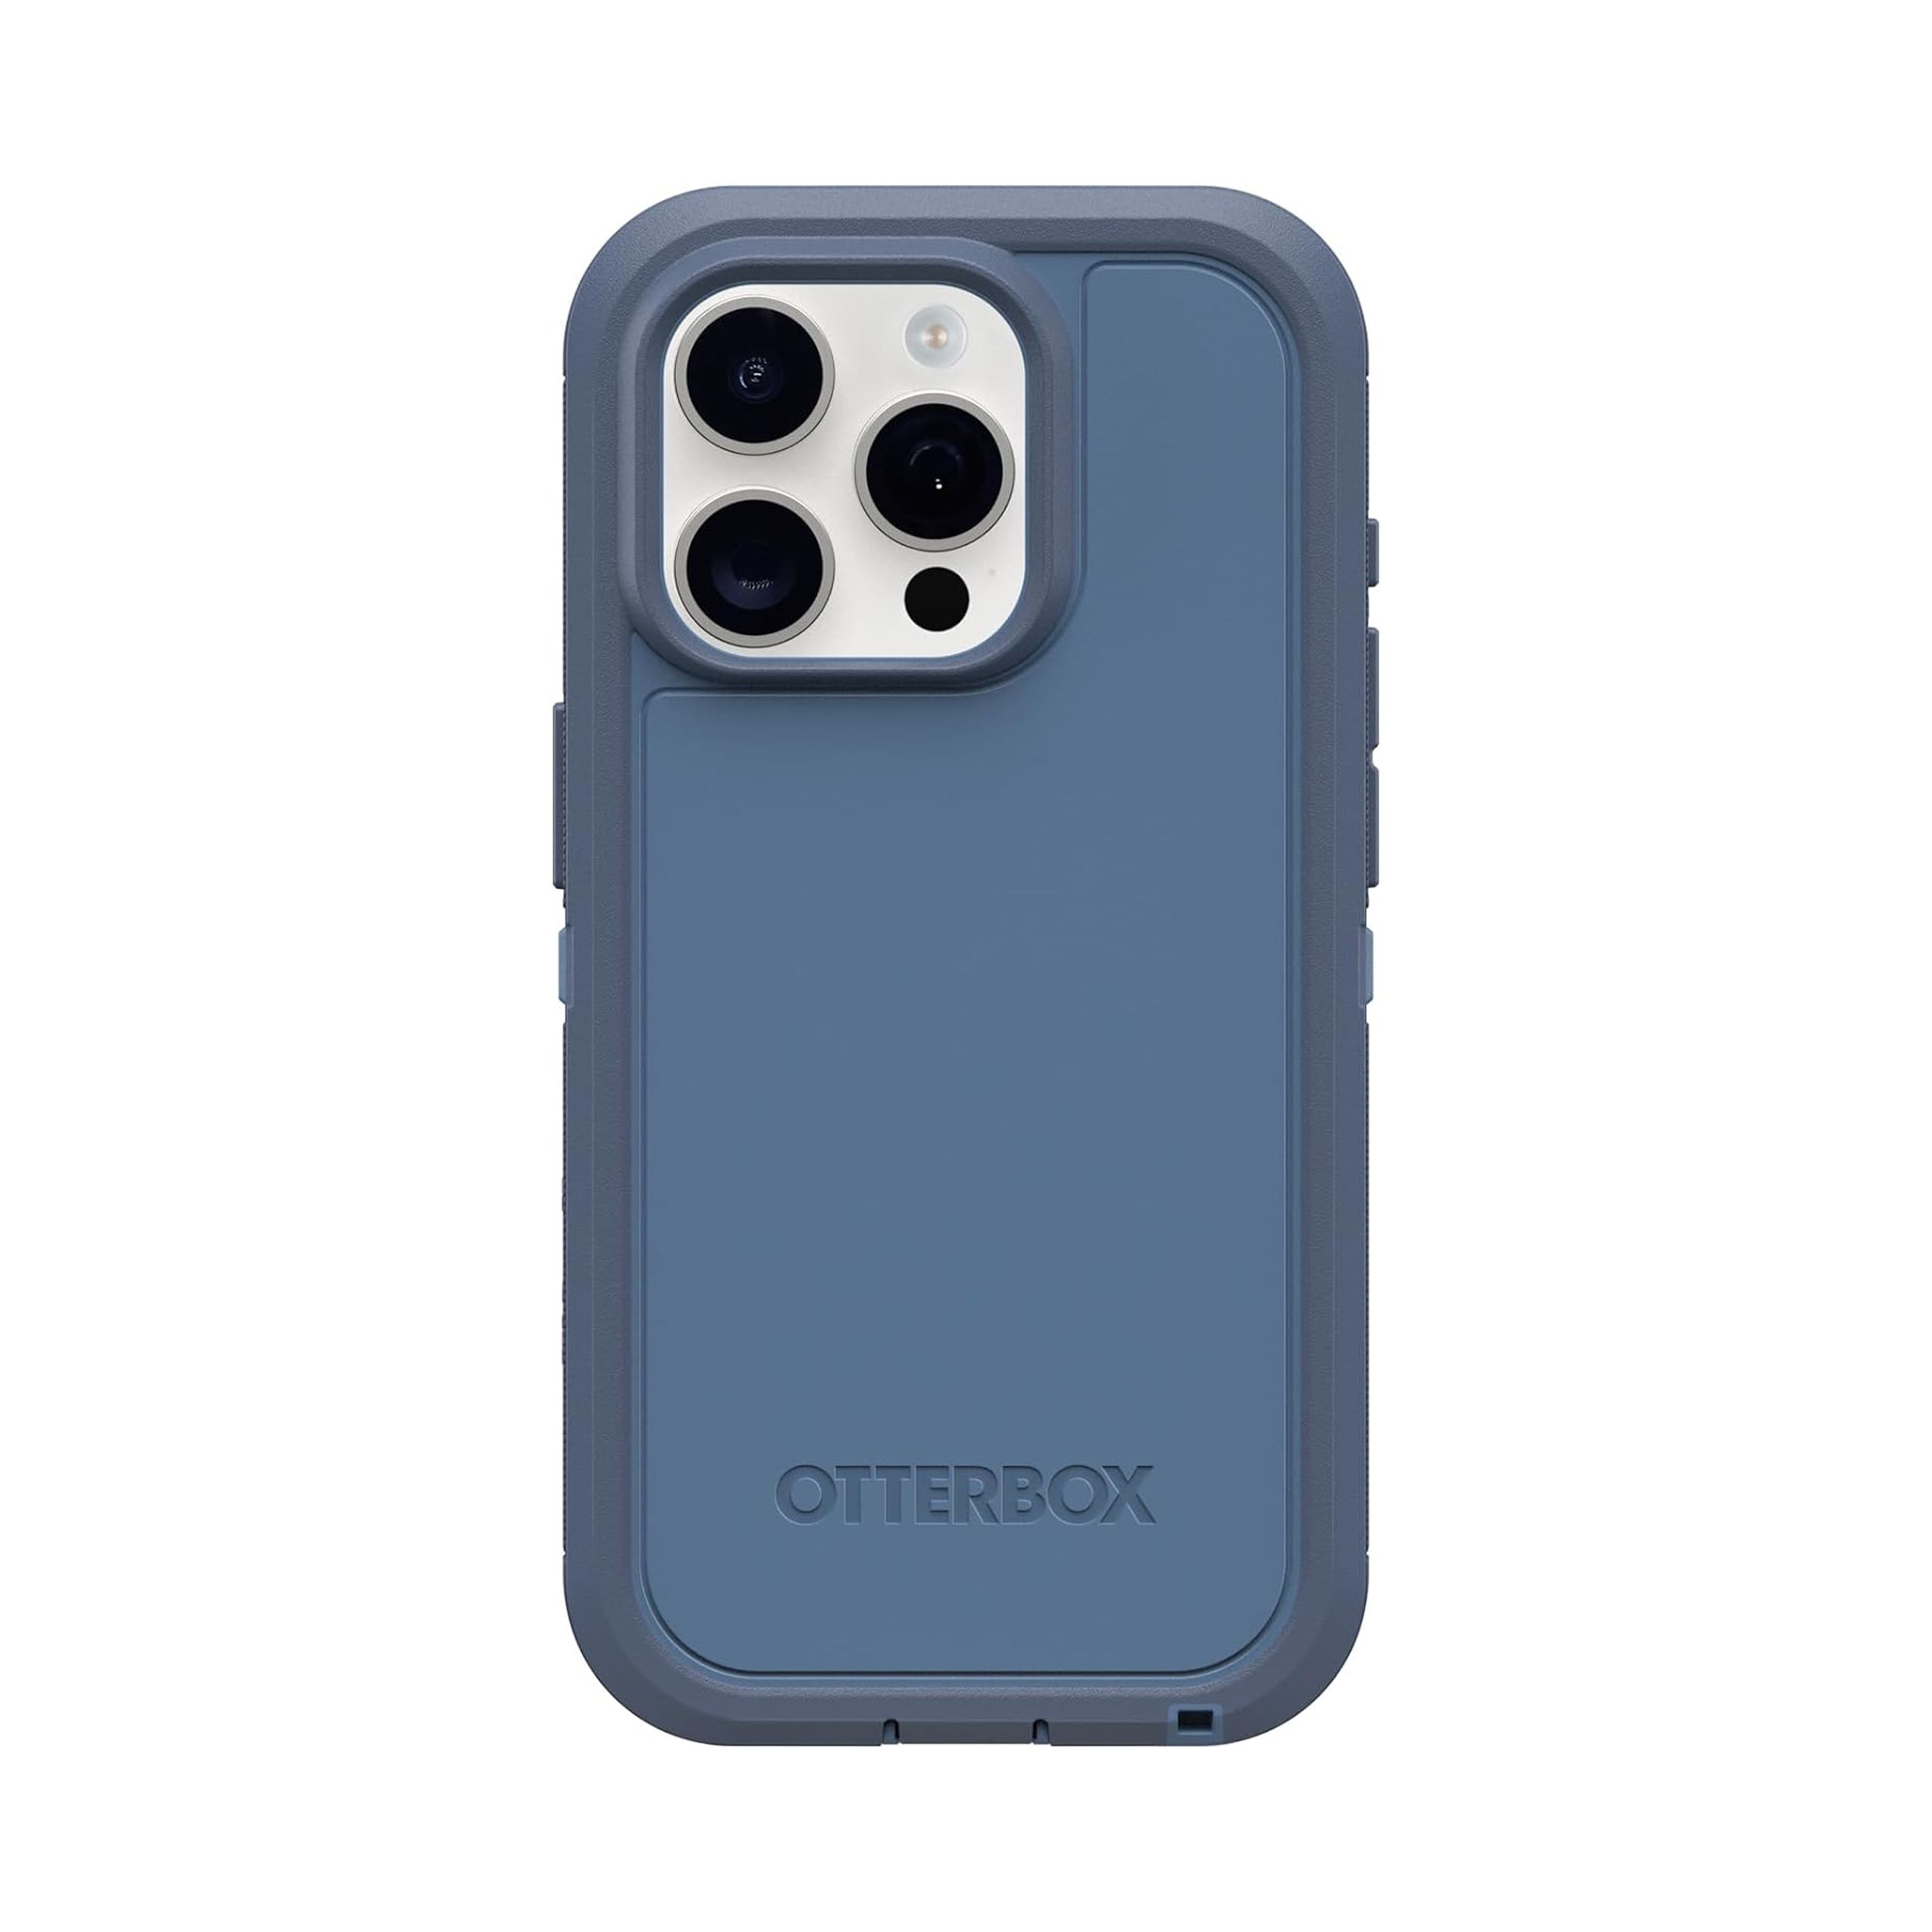 The OtterBox Defender Series XT against a white background. 